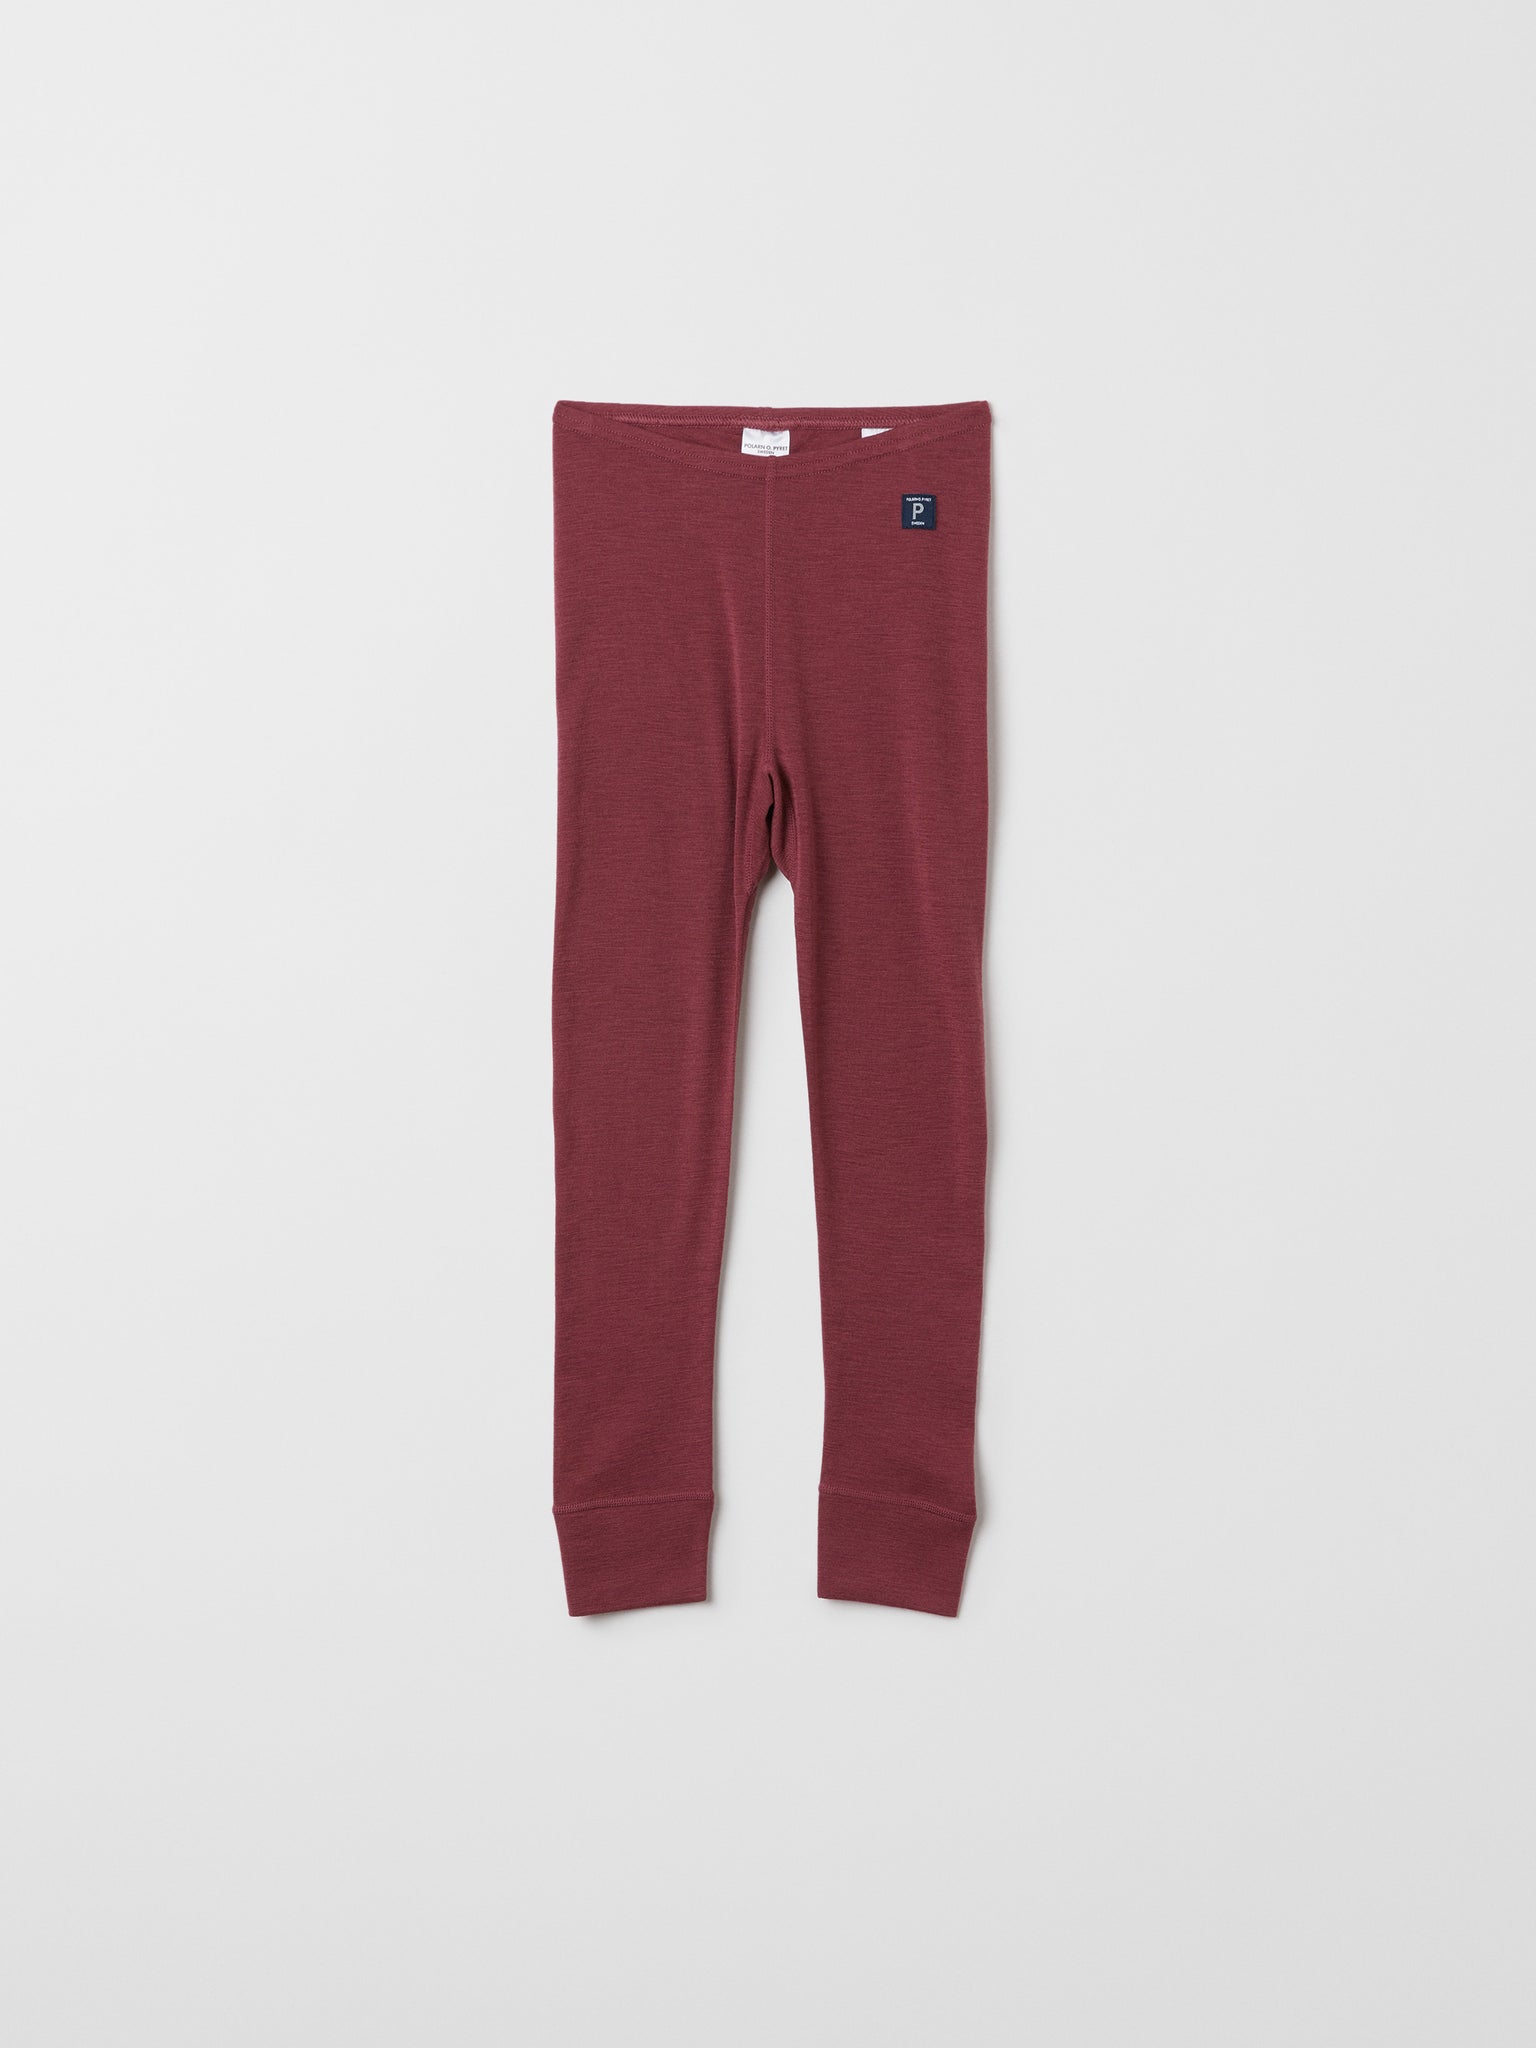 Red Merino Kids Thermal Leggings from the Polarn O. Pyret outerwear collection. The best ethical kids outerwear.